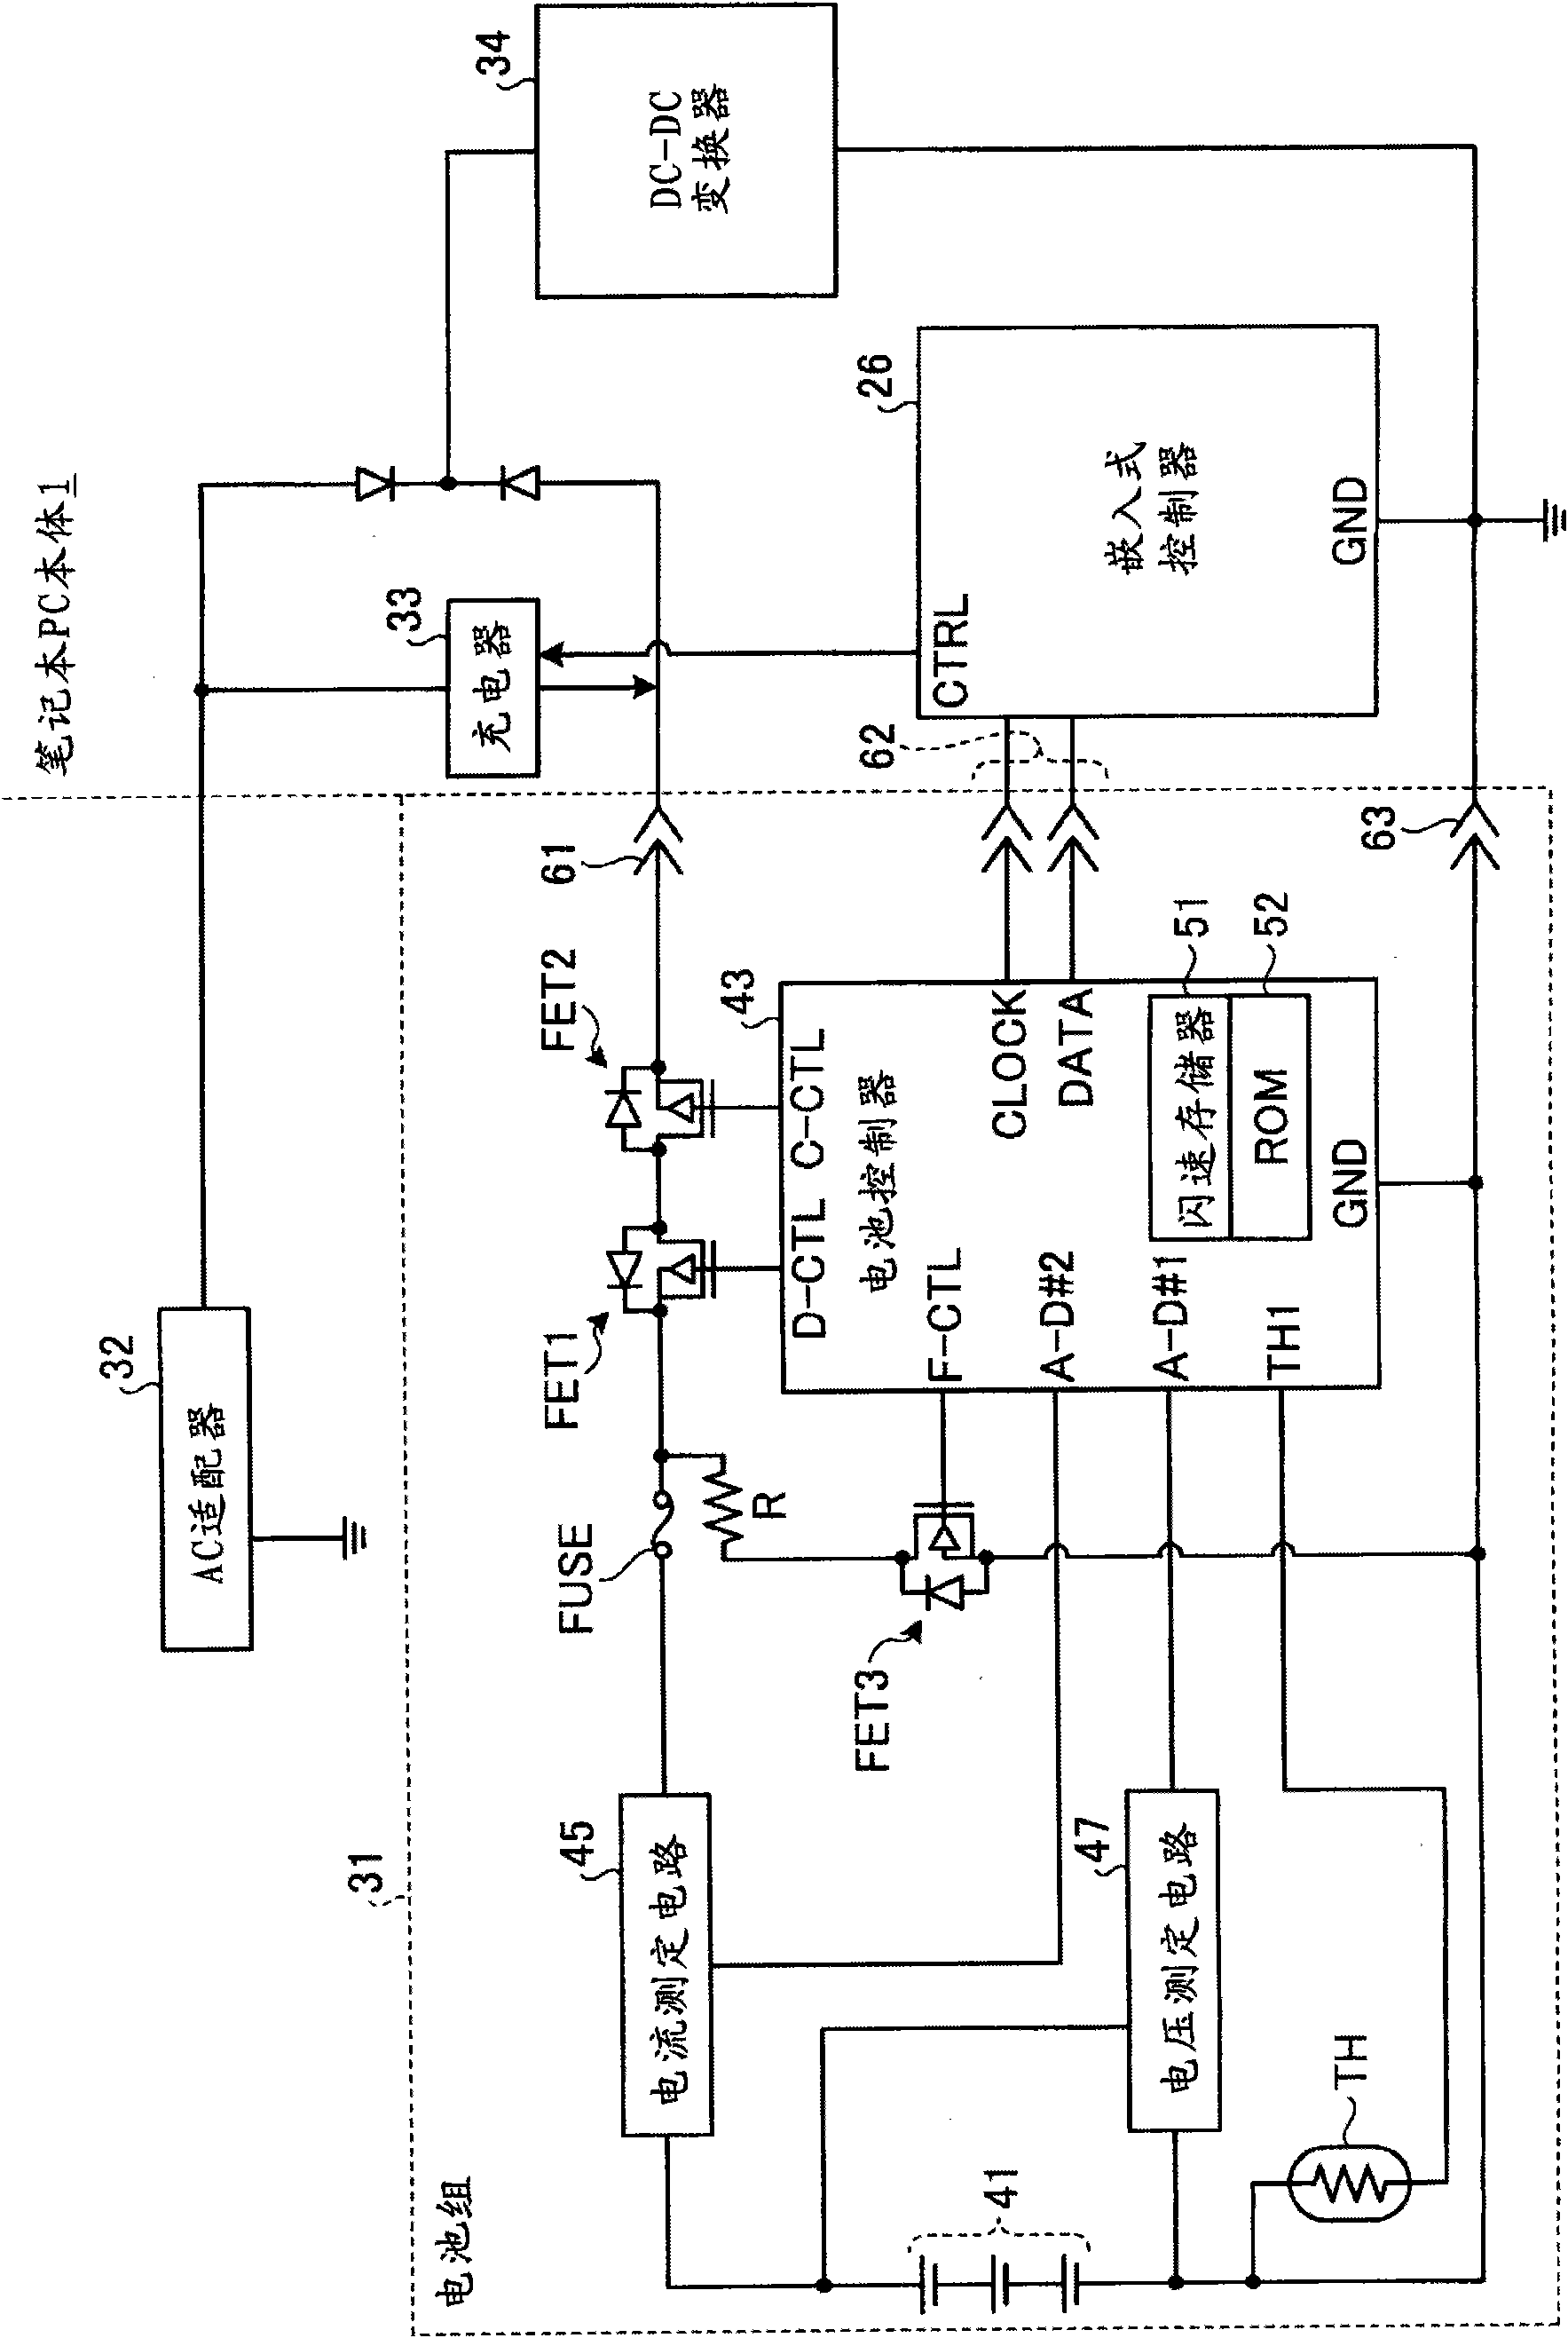 Battery pack, battery pack firmware updating method, and battery pack system